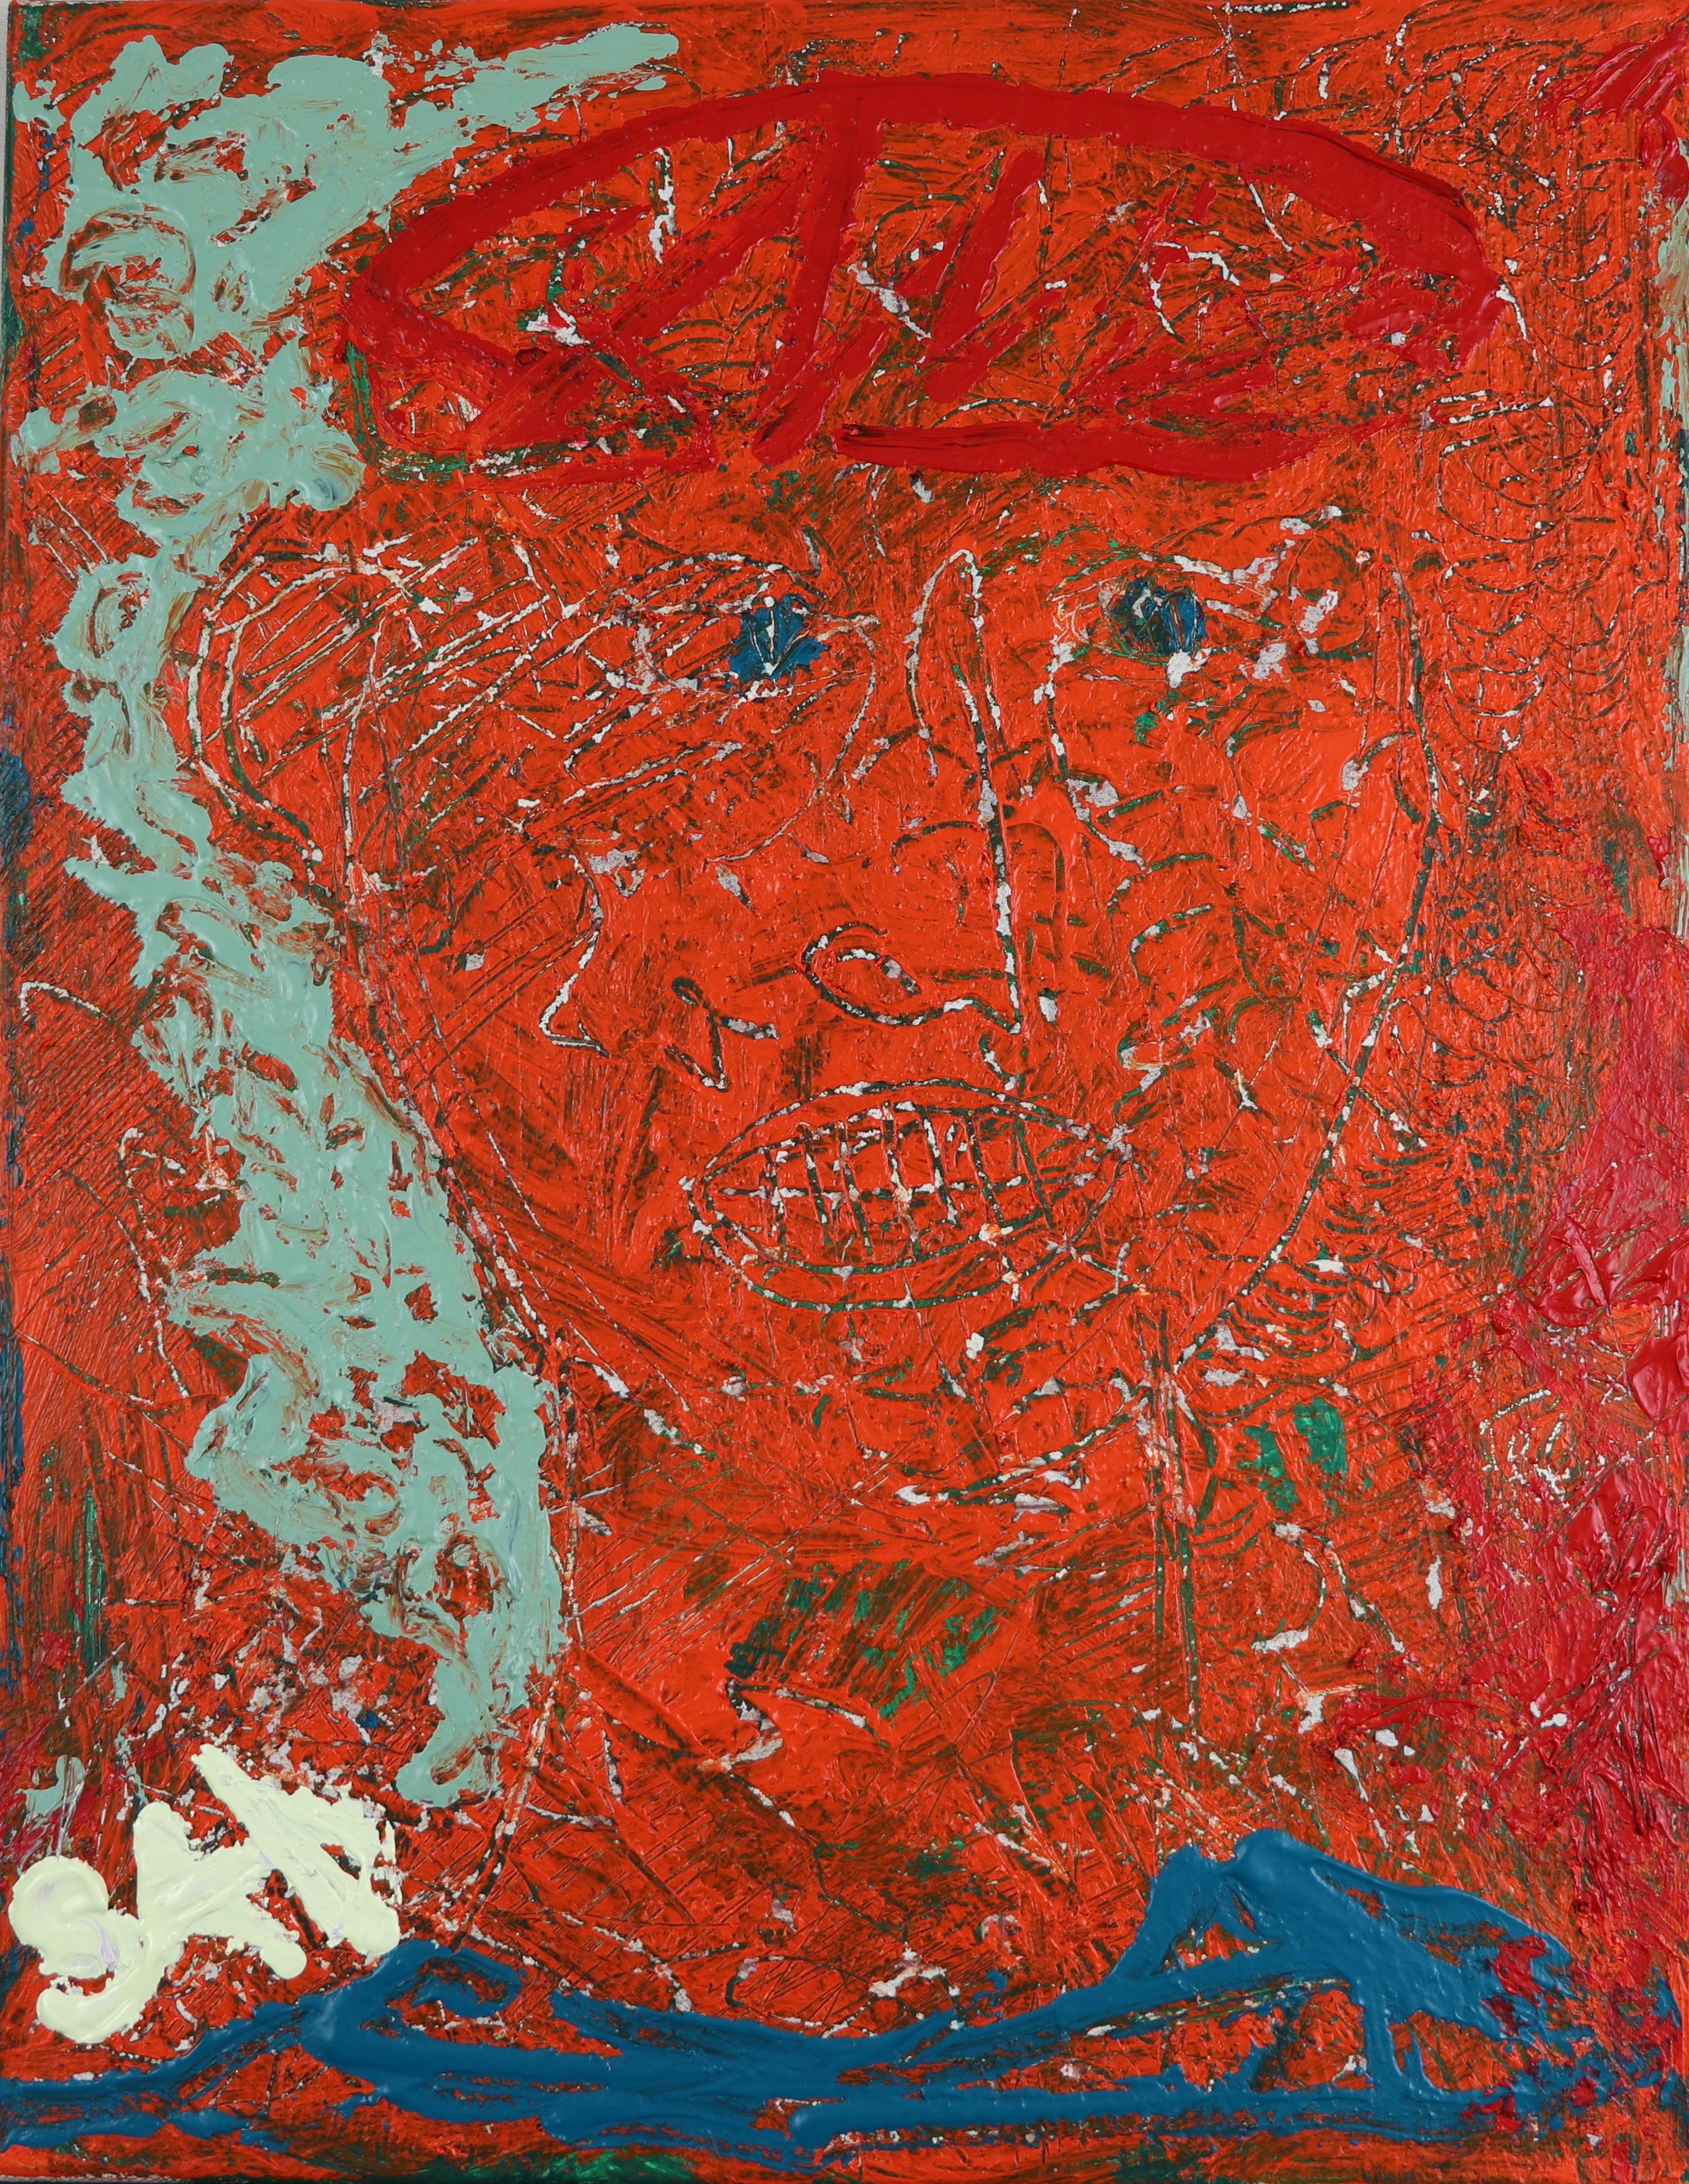 Sax Berlin Figurative Painting - Blue Eyed Guardian. Contemporary Neo Expressionist Oil Painting